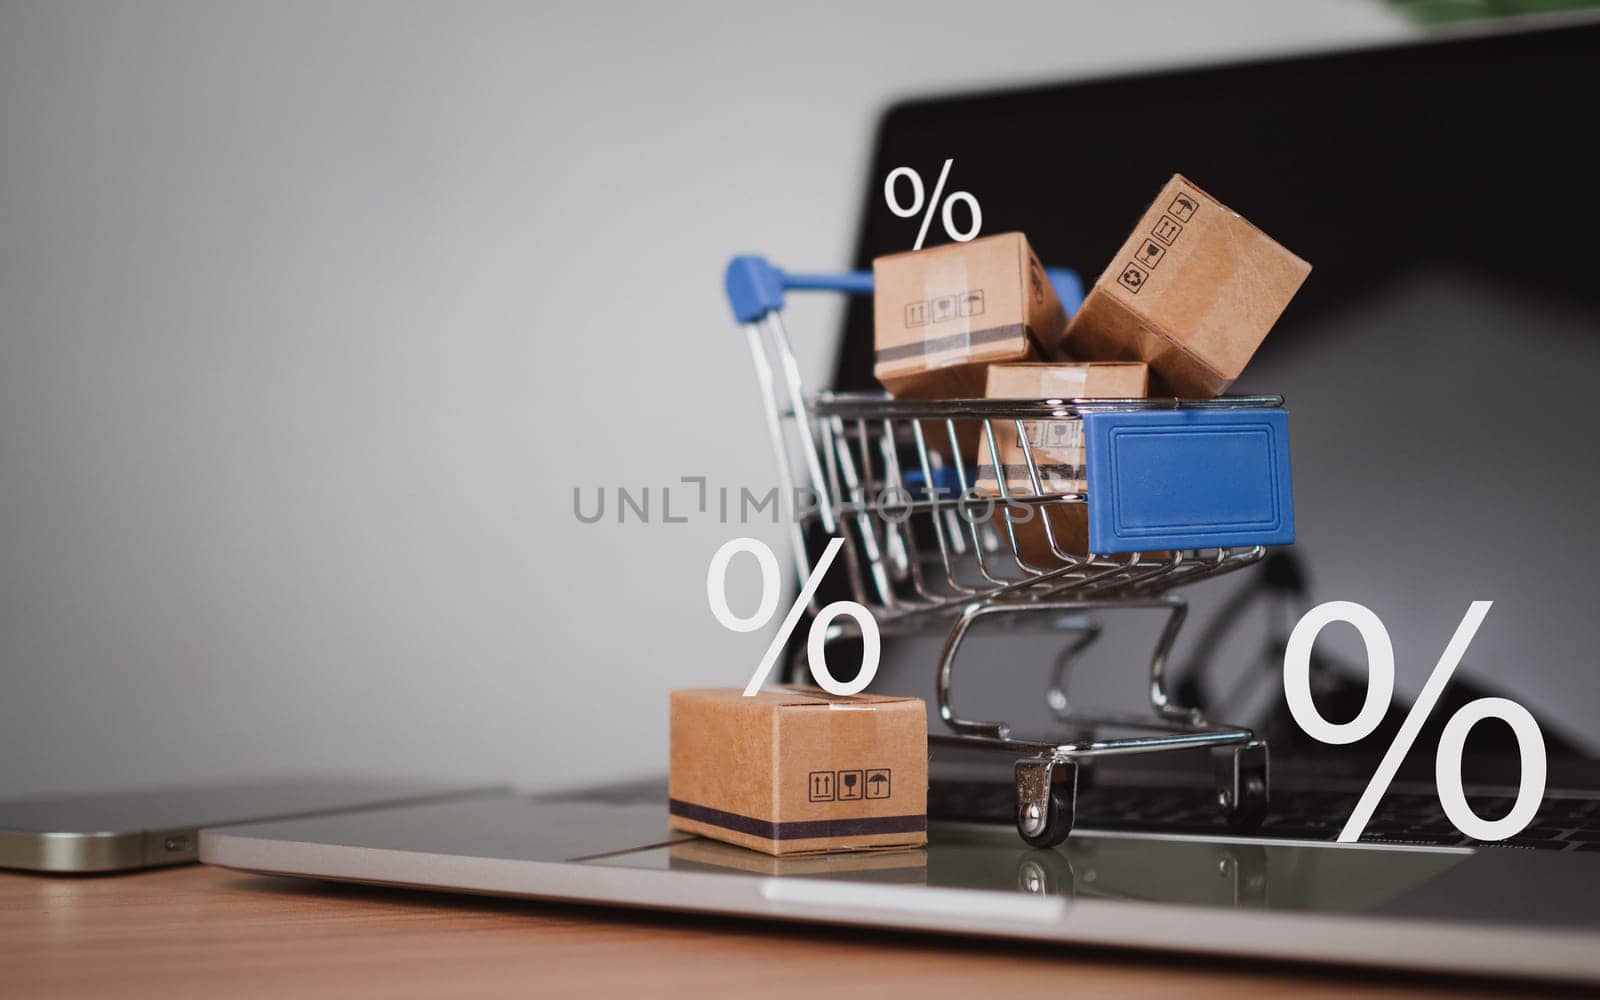 Sale percentage with shopping cart and boxes placed on computer keyboard. Online shopping concept, special price products, Special offers and promotions by Unimages2527